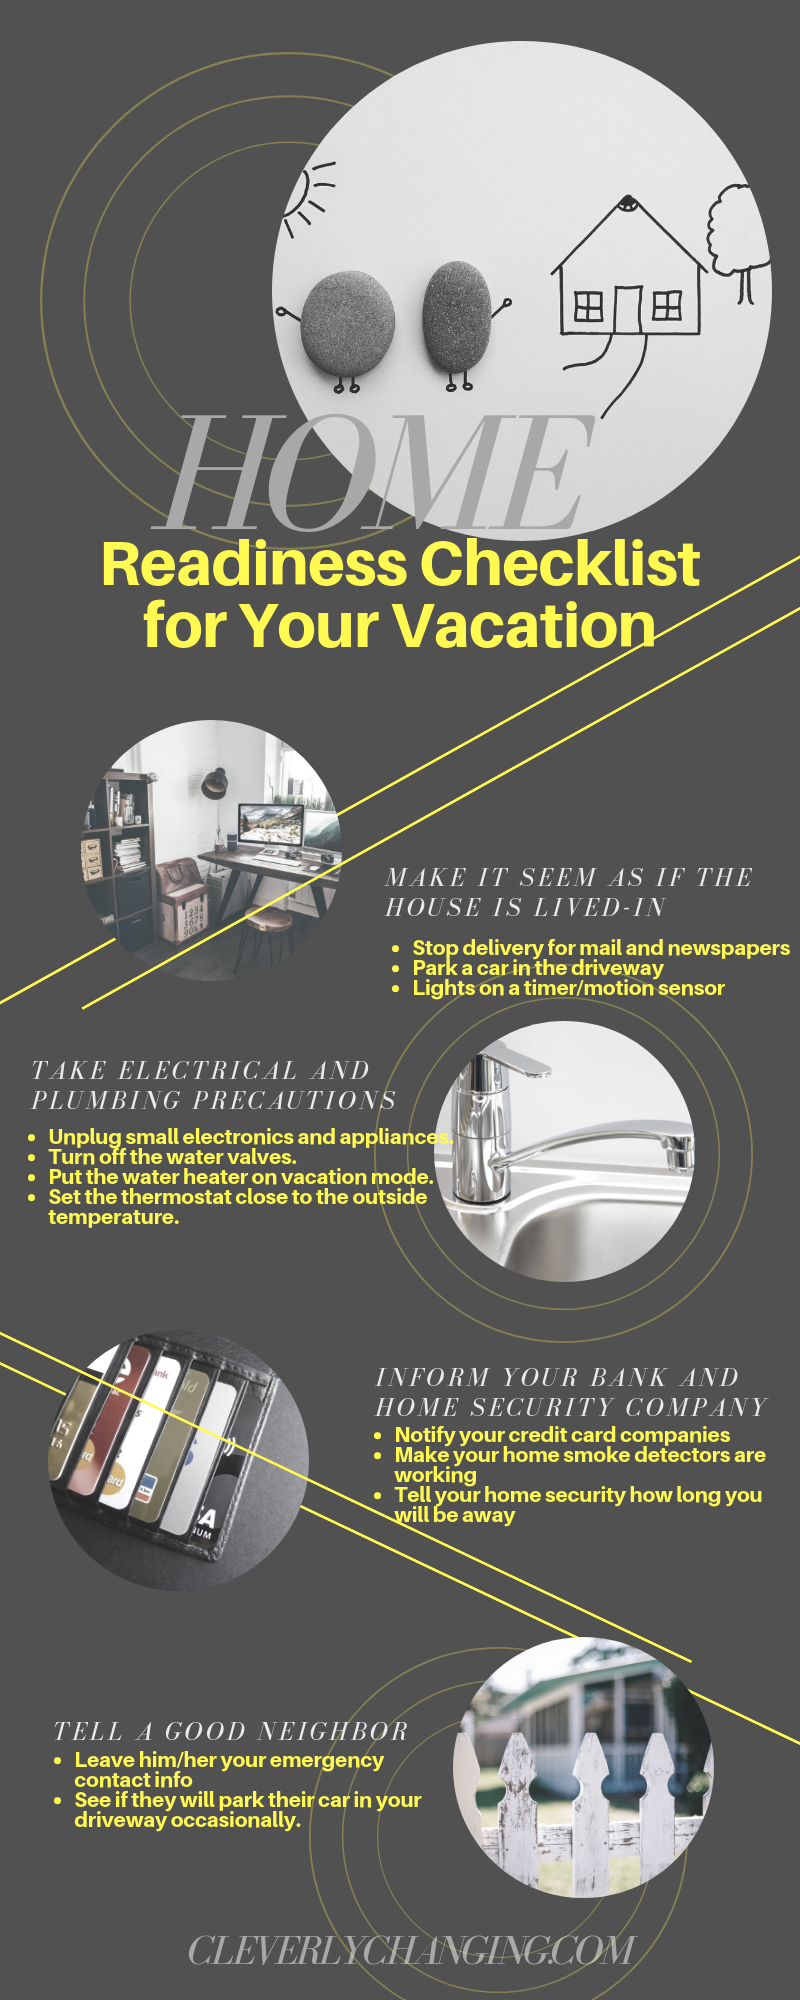 Prepare your home for vacation readiness checklist